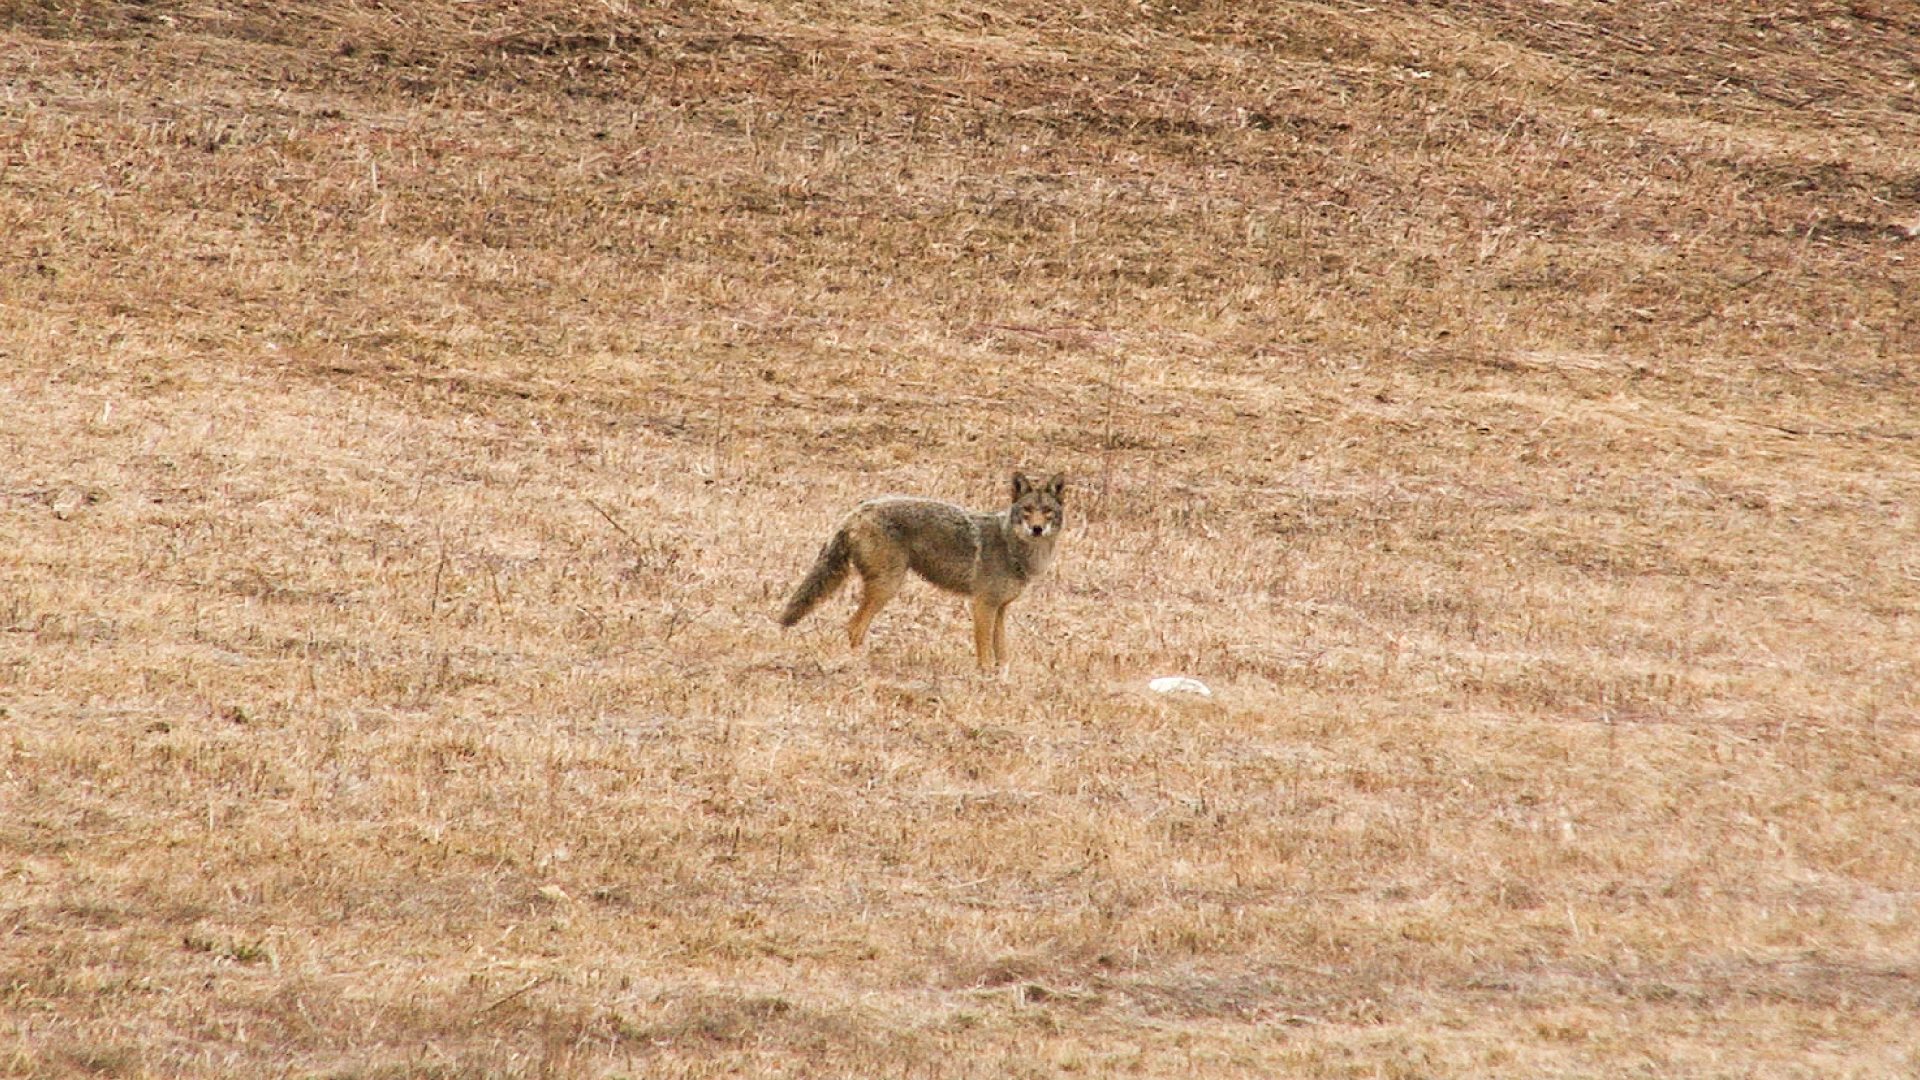 Coyote Hunting Video